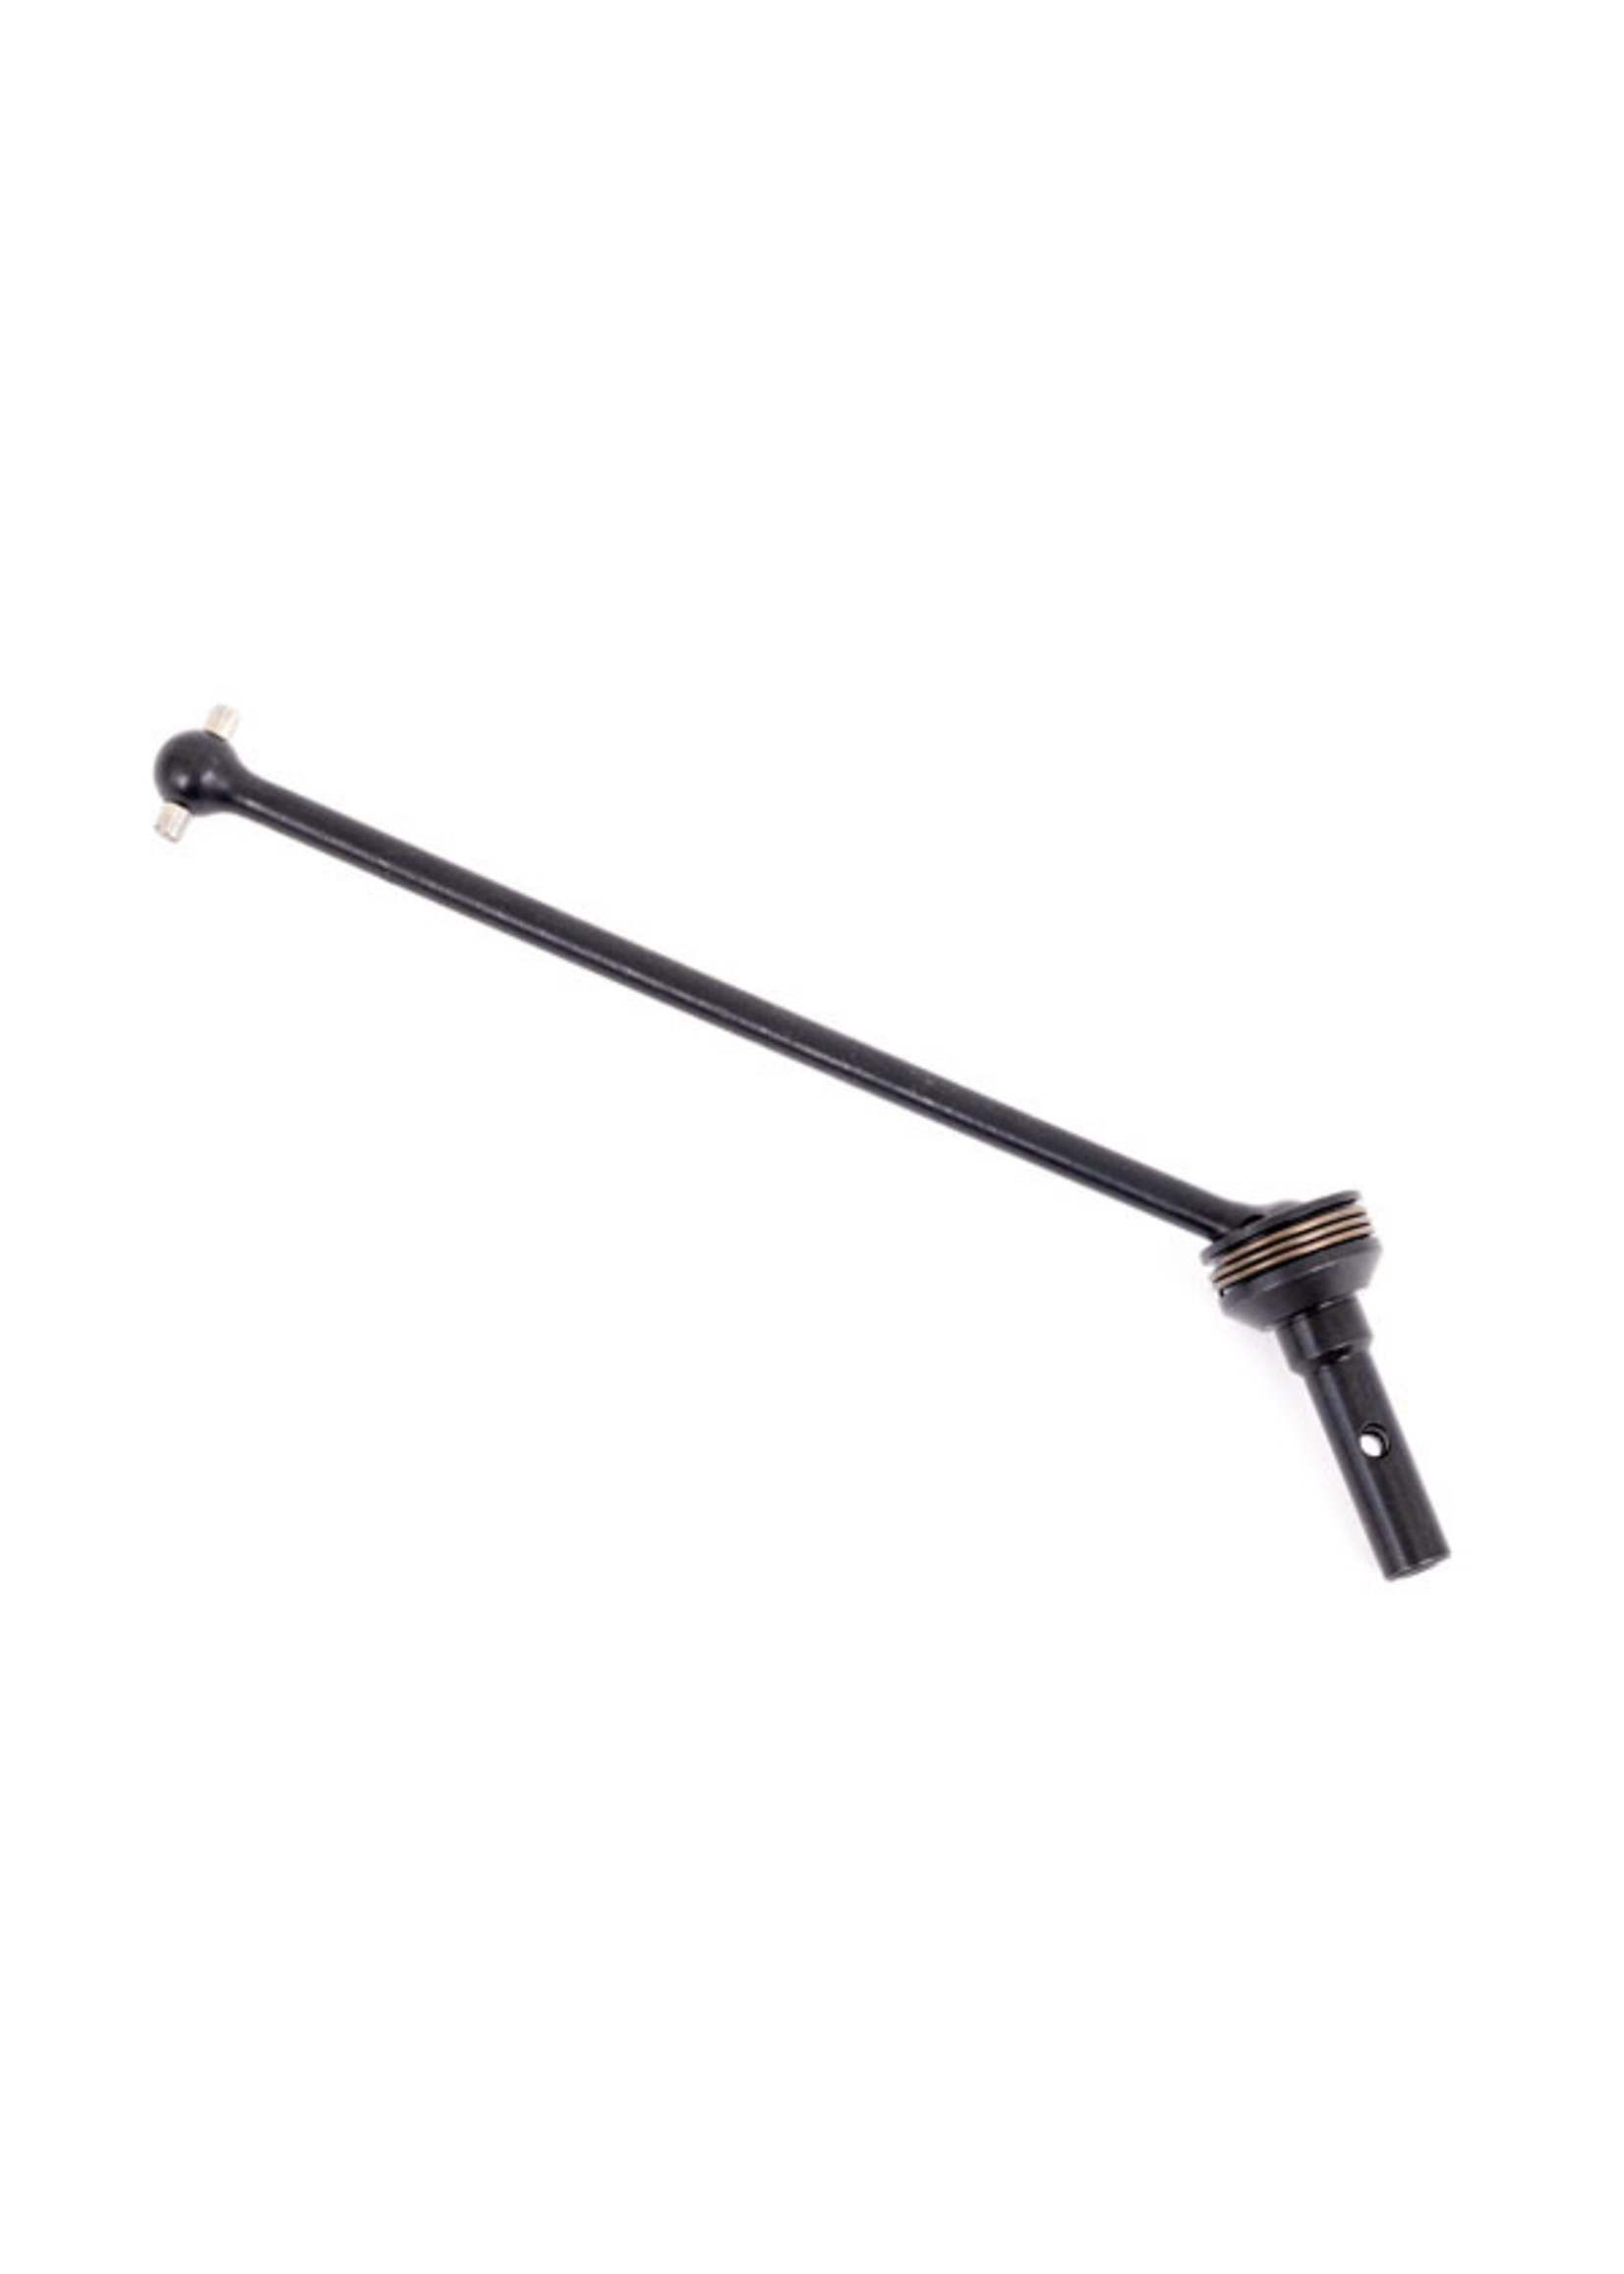 Traxxas 9550 - Driveshaft, Steel Constant-Velocity, Front